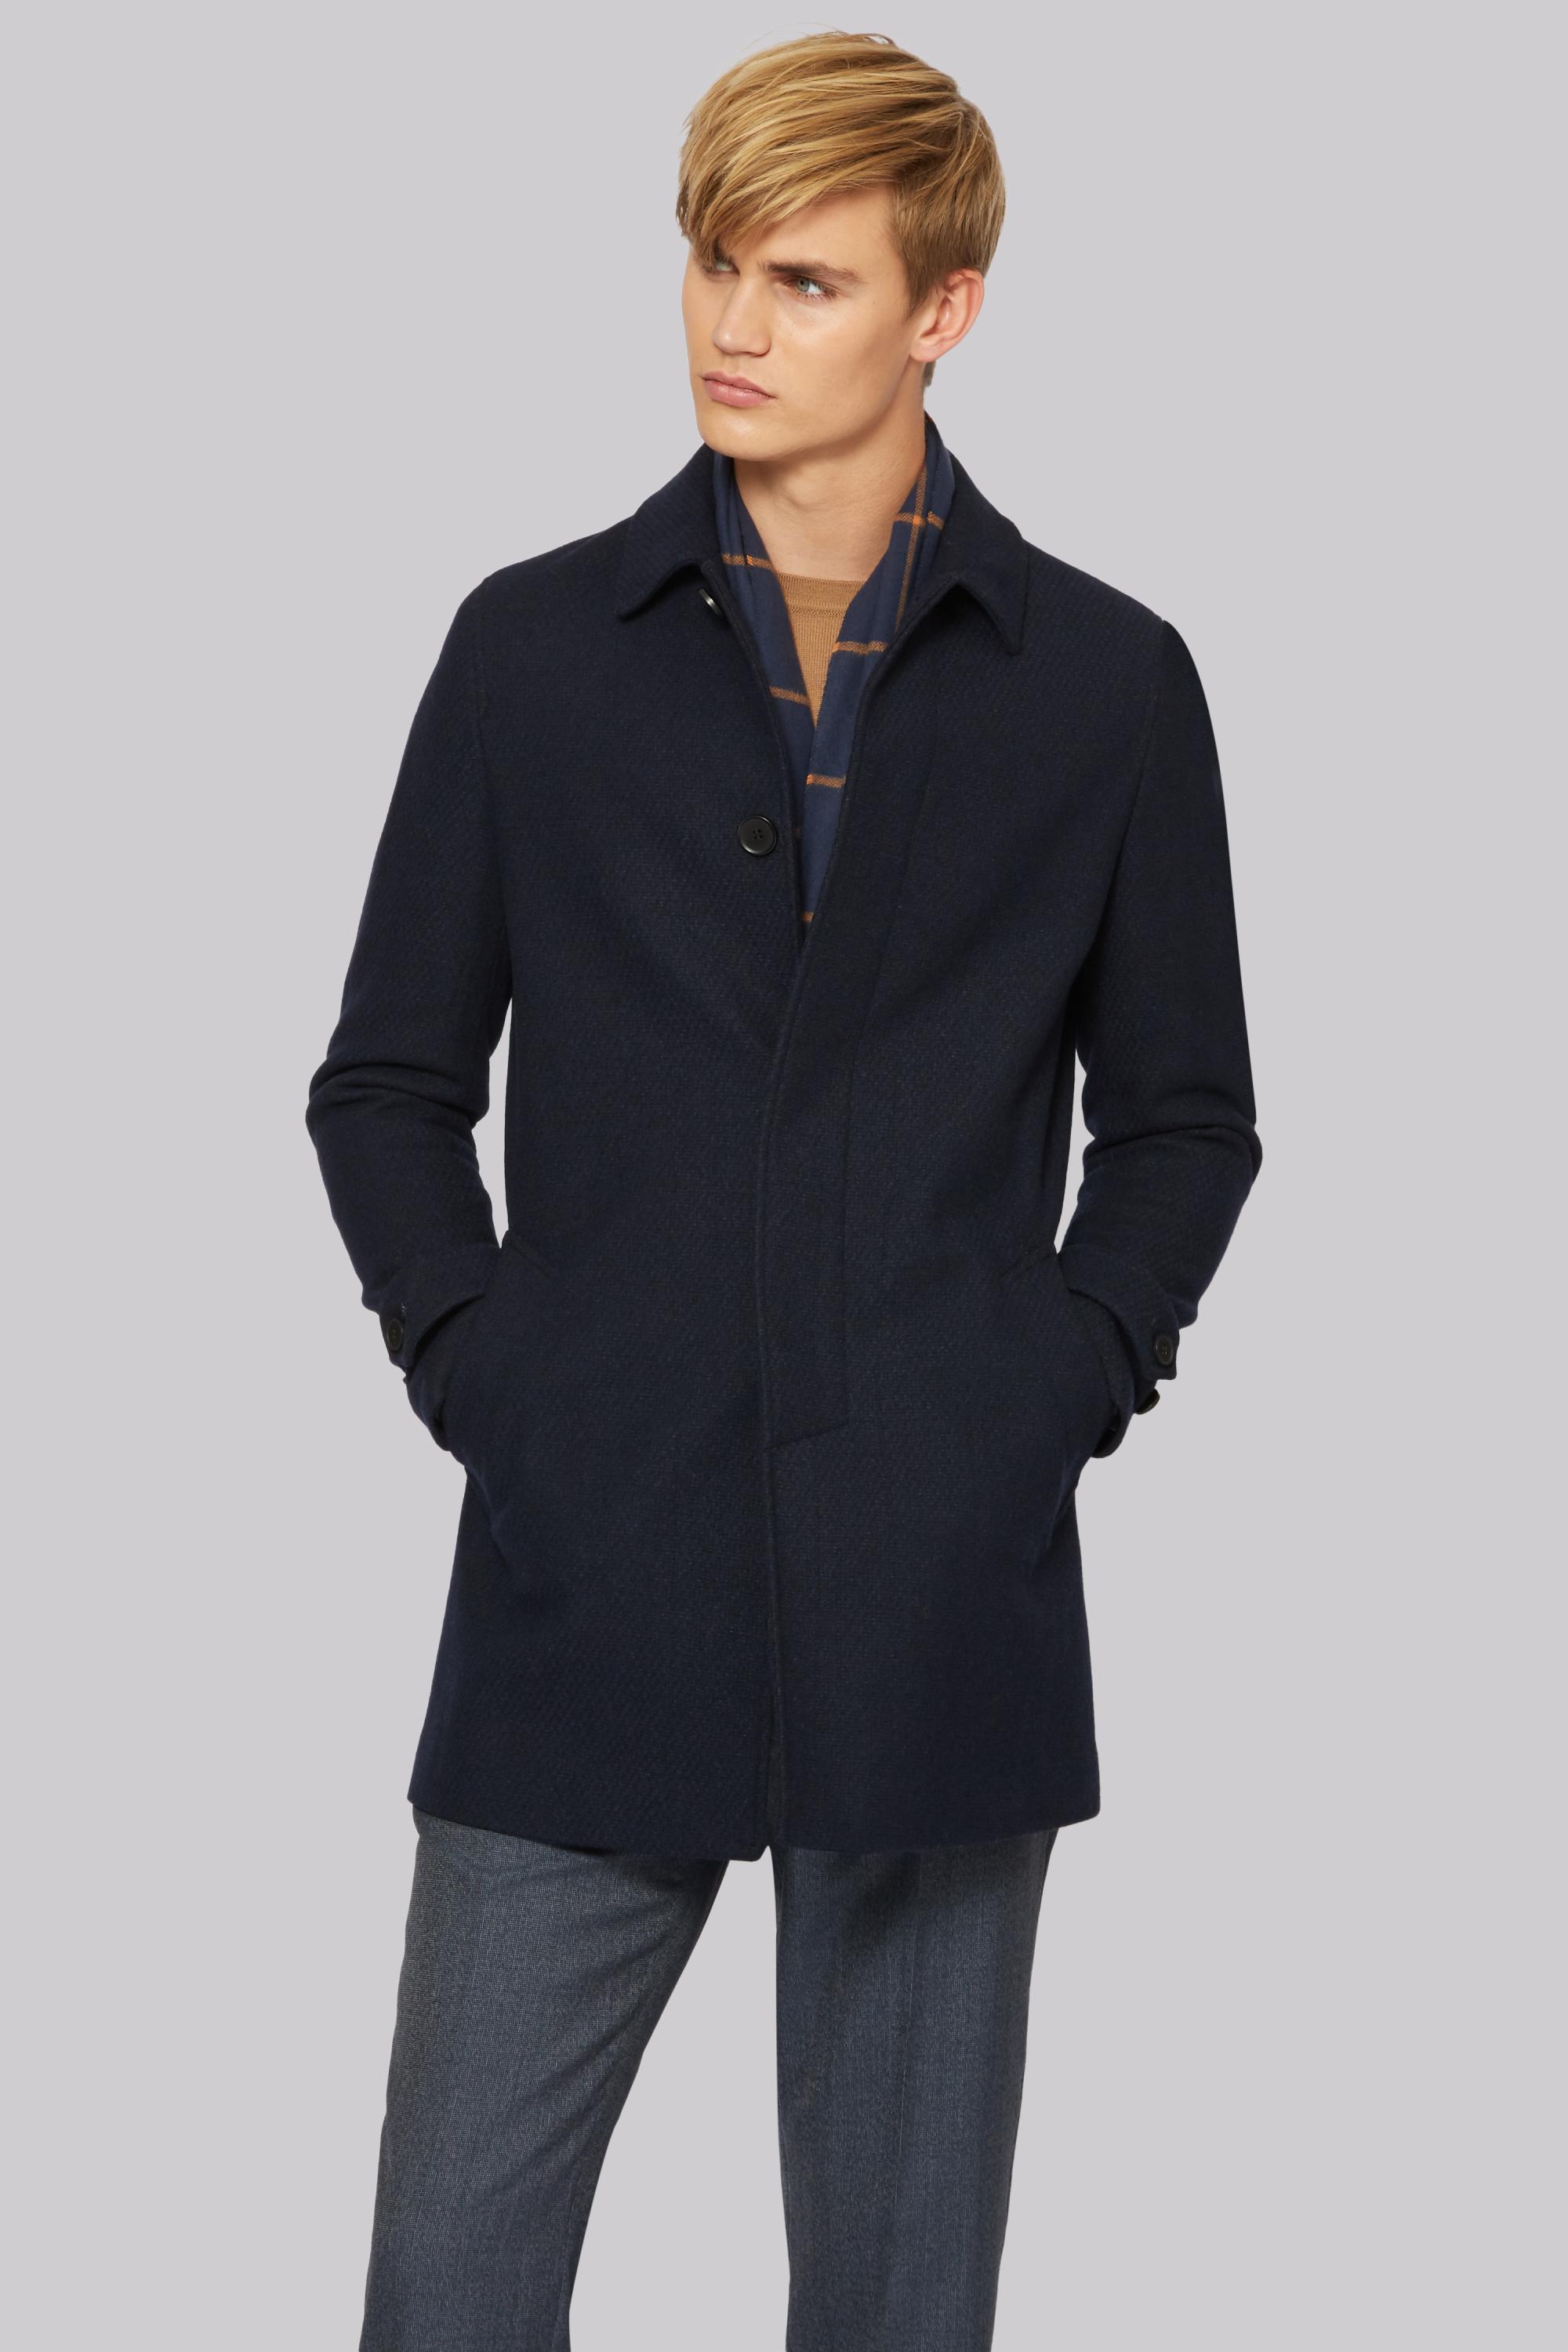 French Connection Slim Fit Navy Car Coat in Blue for Men - Lyst